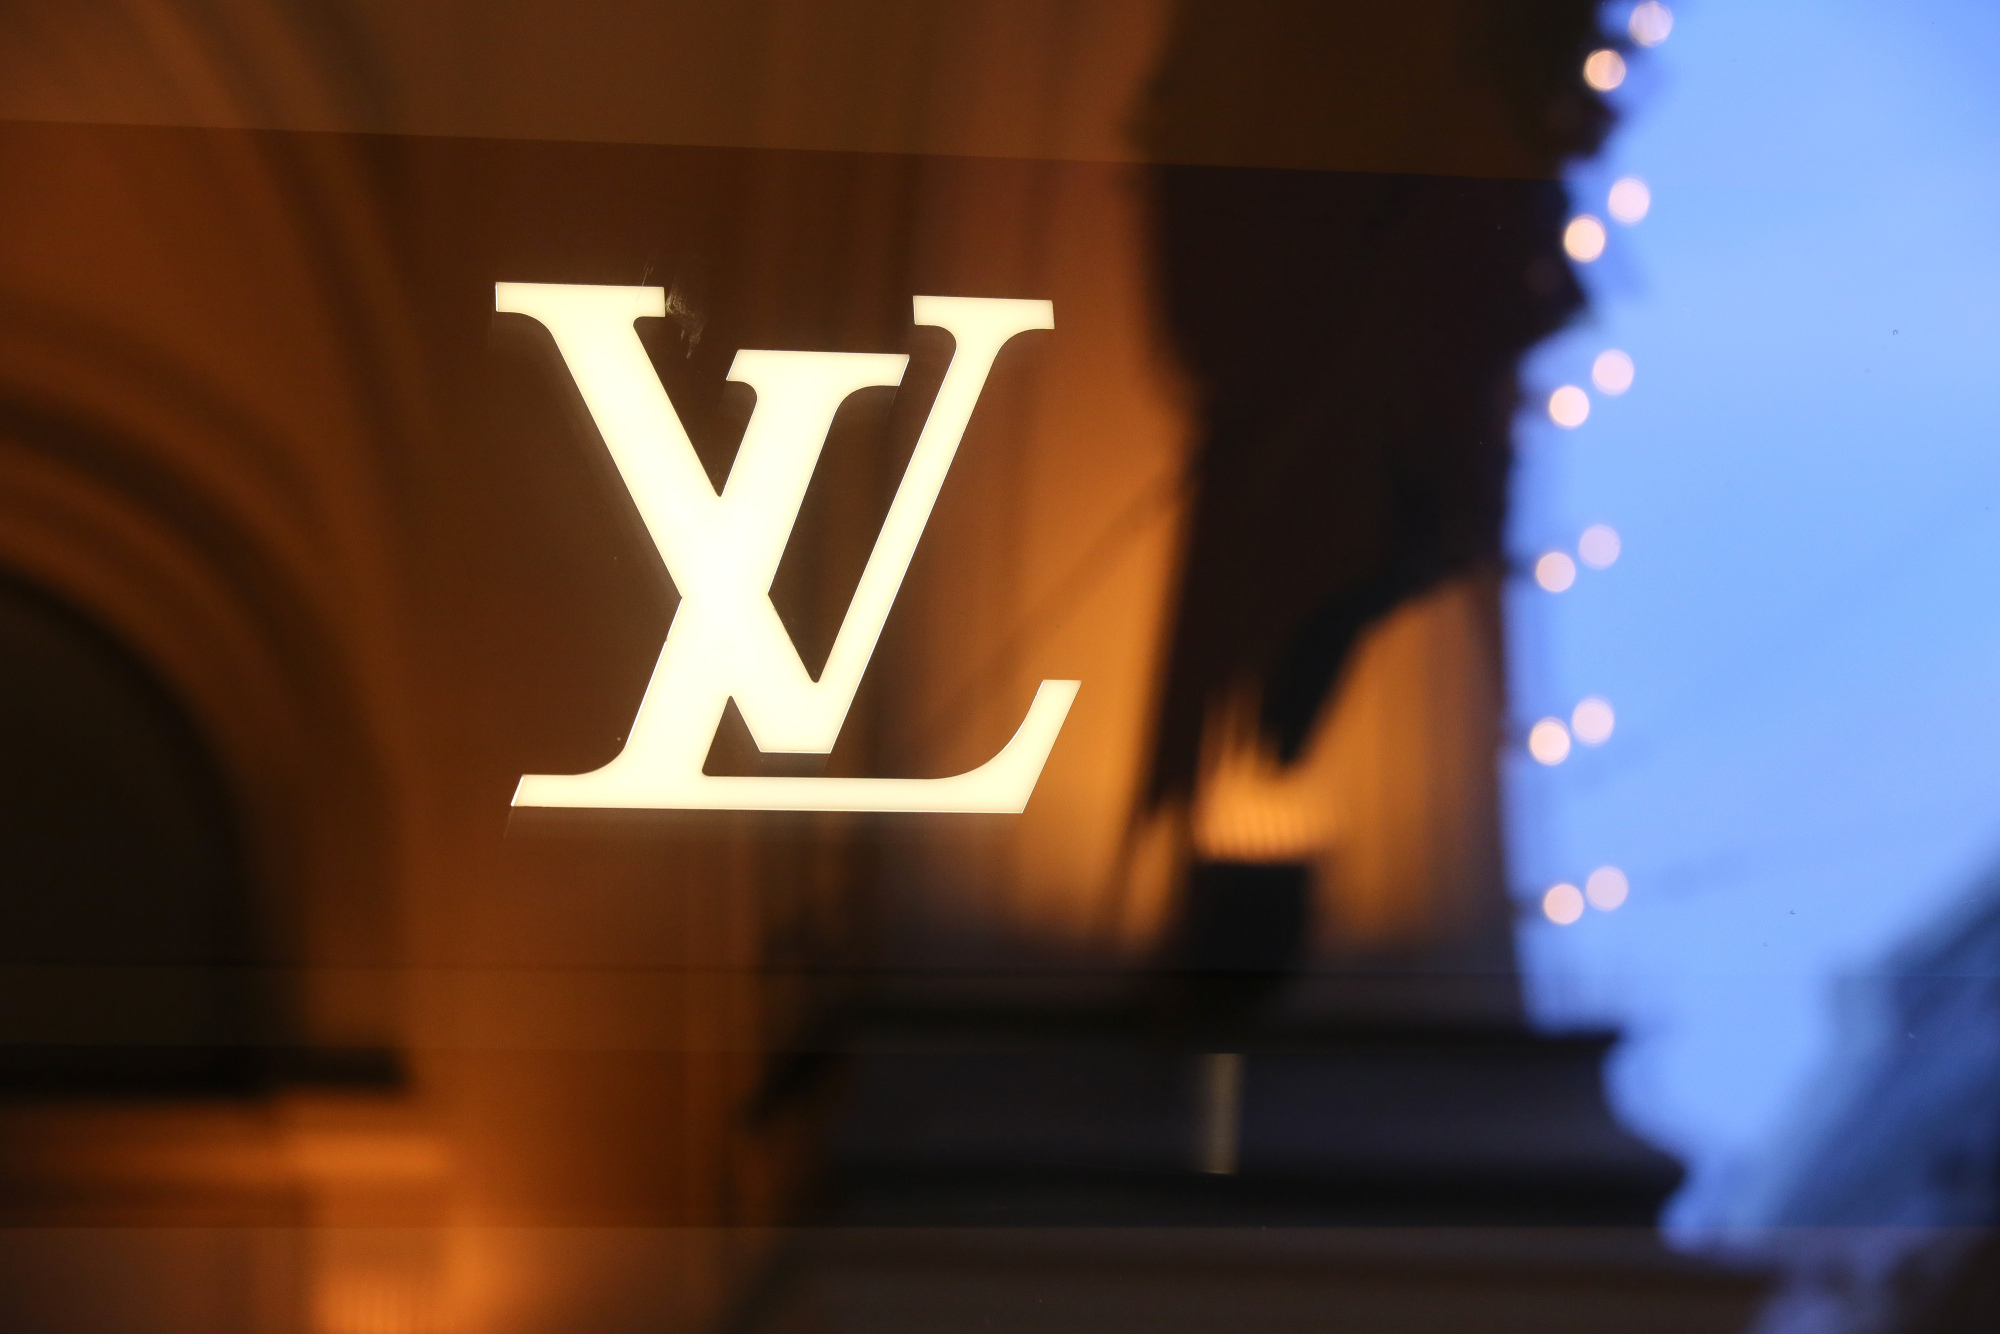 LVMH Moet Hennessy Louis Vuitton SA ADR Stock Price Today